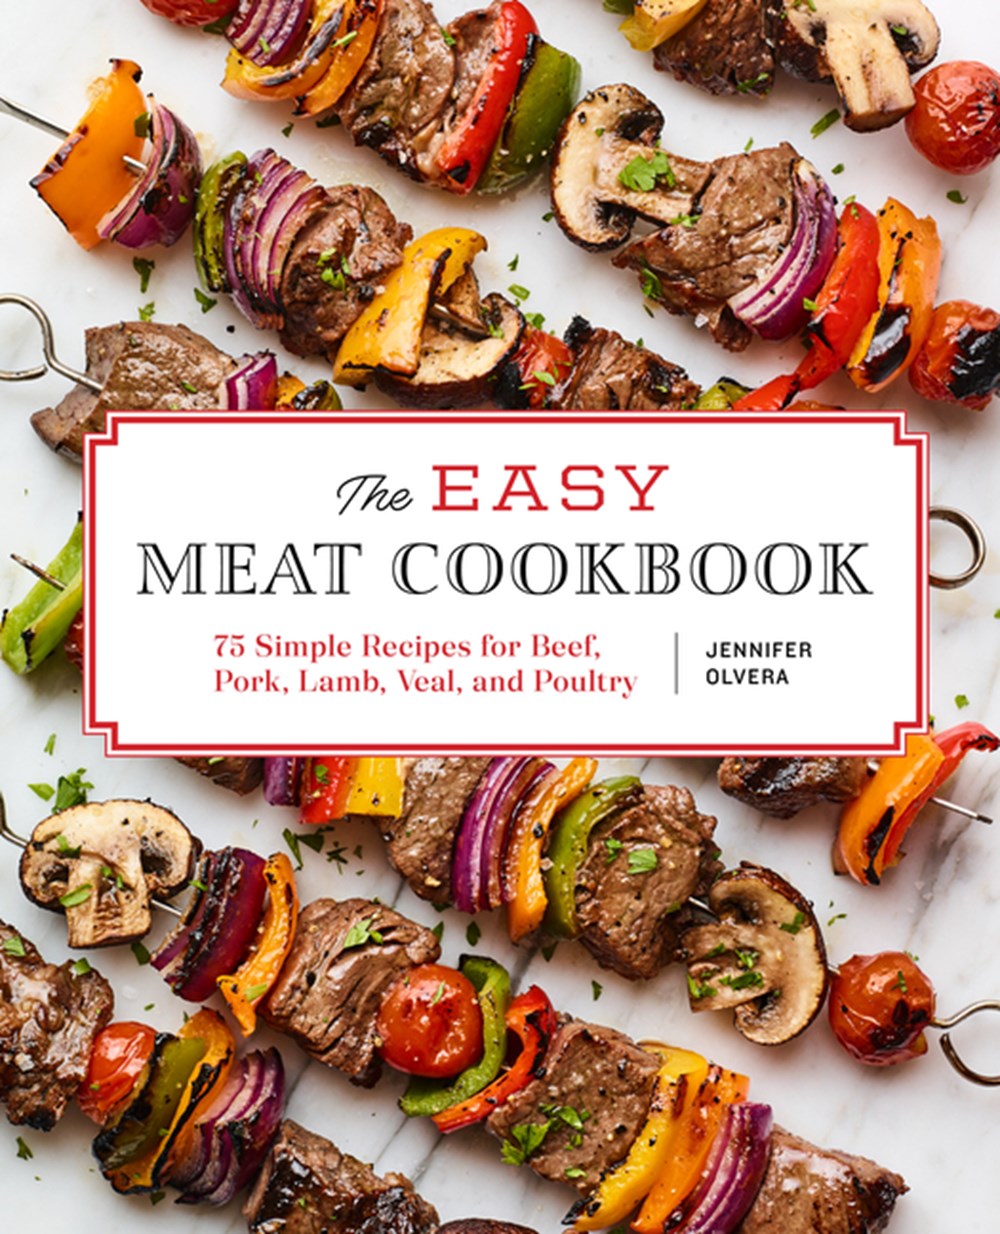 Easy Meat Cookbook: 75 Simple Recipes for Beef, Pork, Lamb, Veal, and Poultry